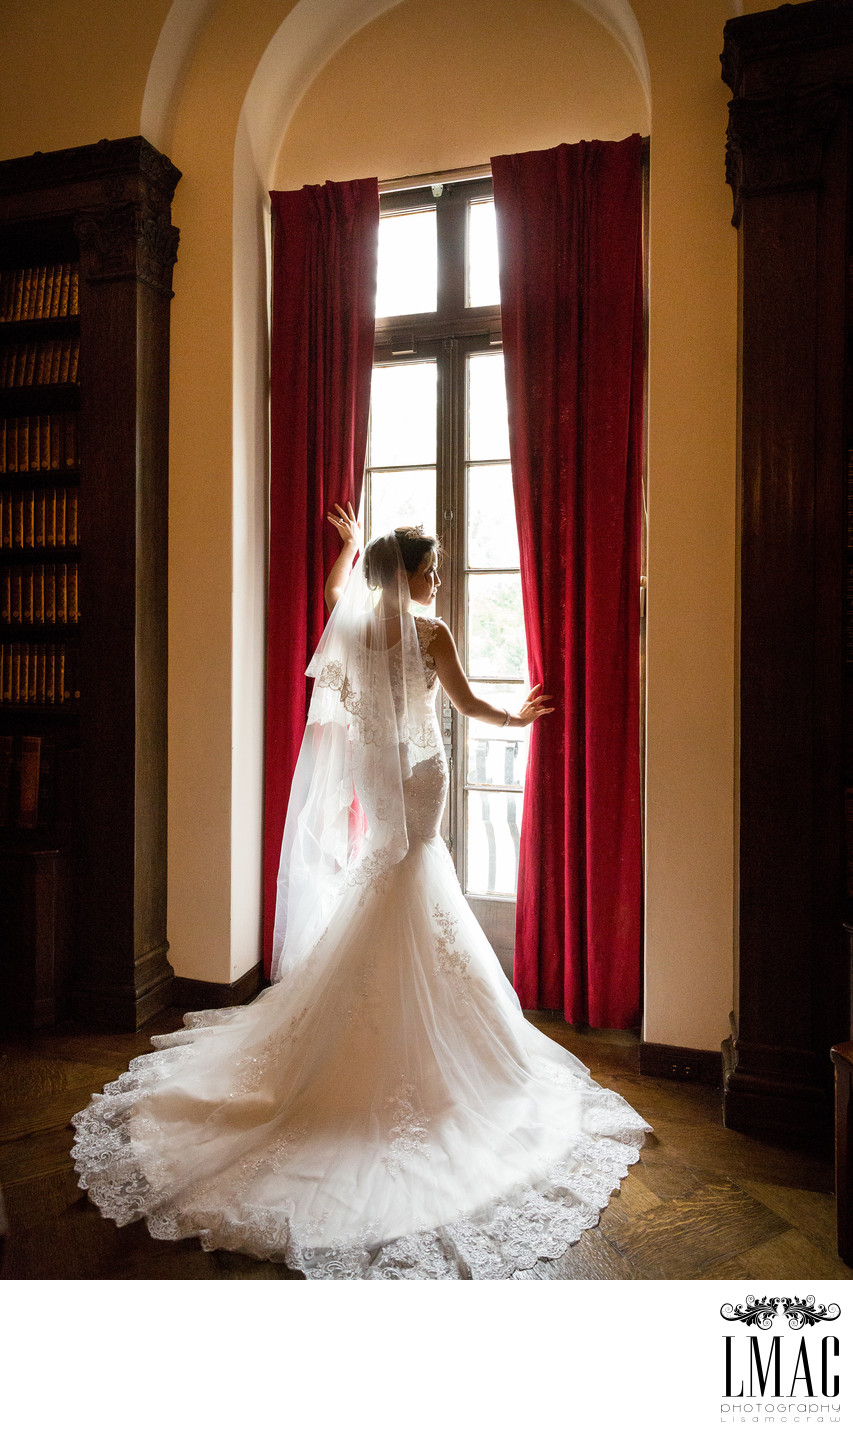 A Fabulous Wedding Shoot at the Cleveland Historical Society